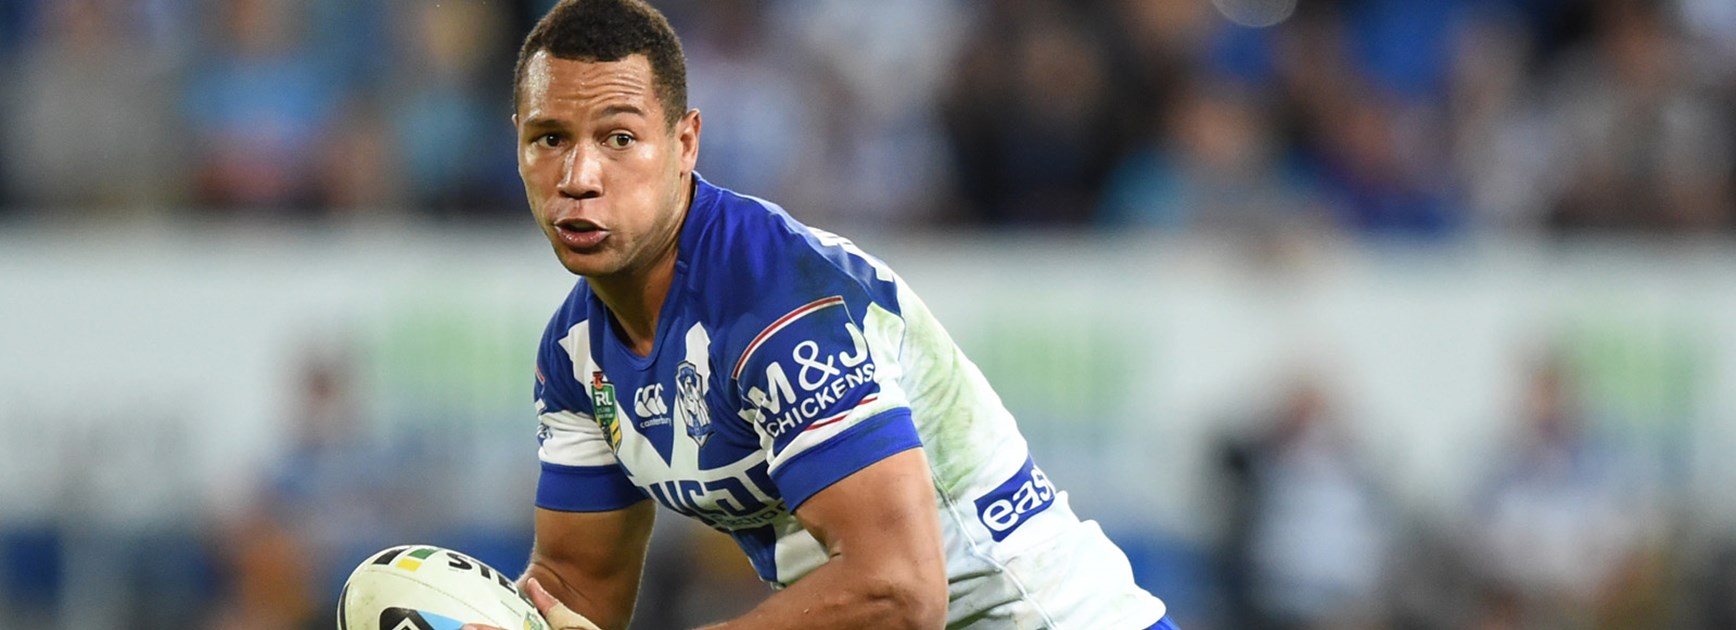 Bulldogs playmaker Moses Mbye has continued to develop into a regular first grade player in 2015.